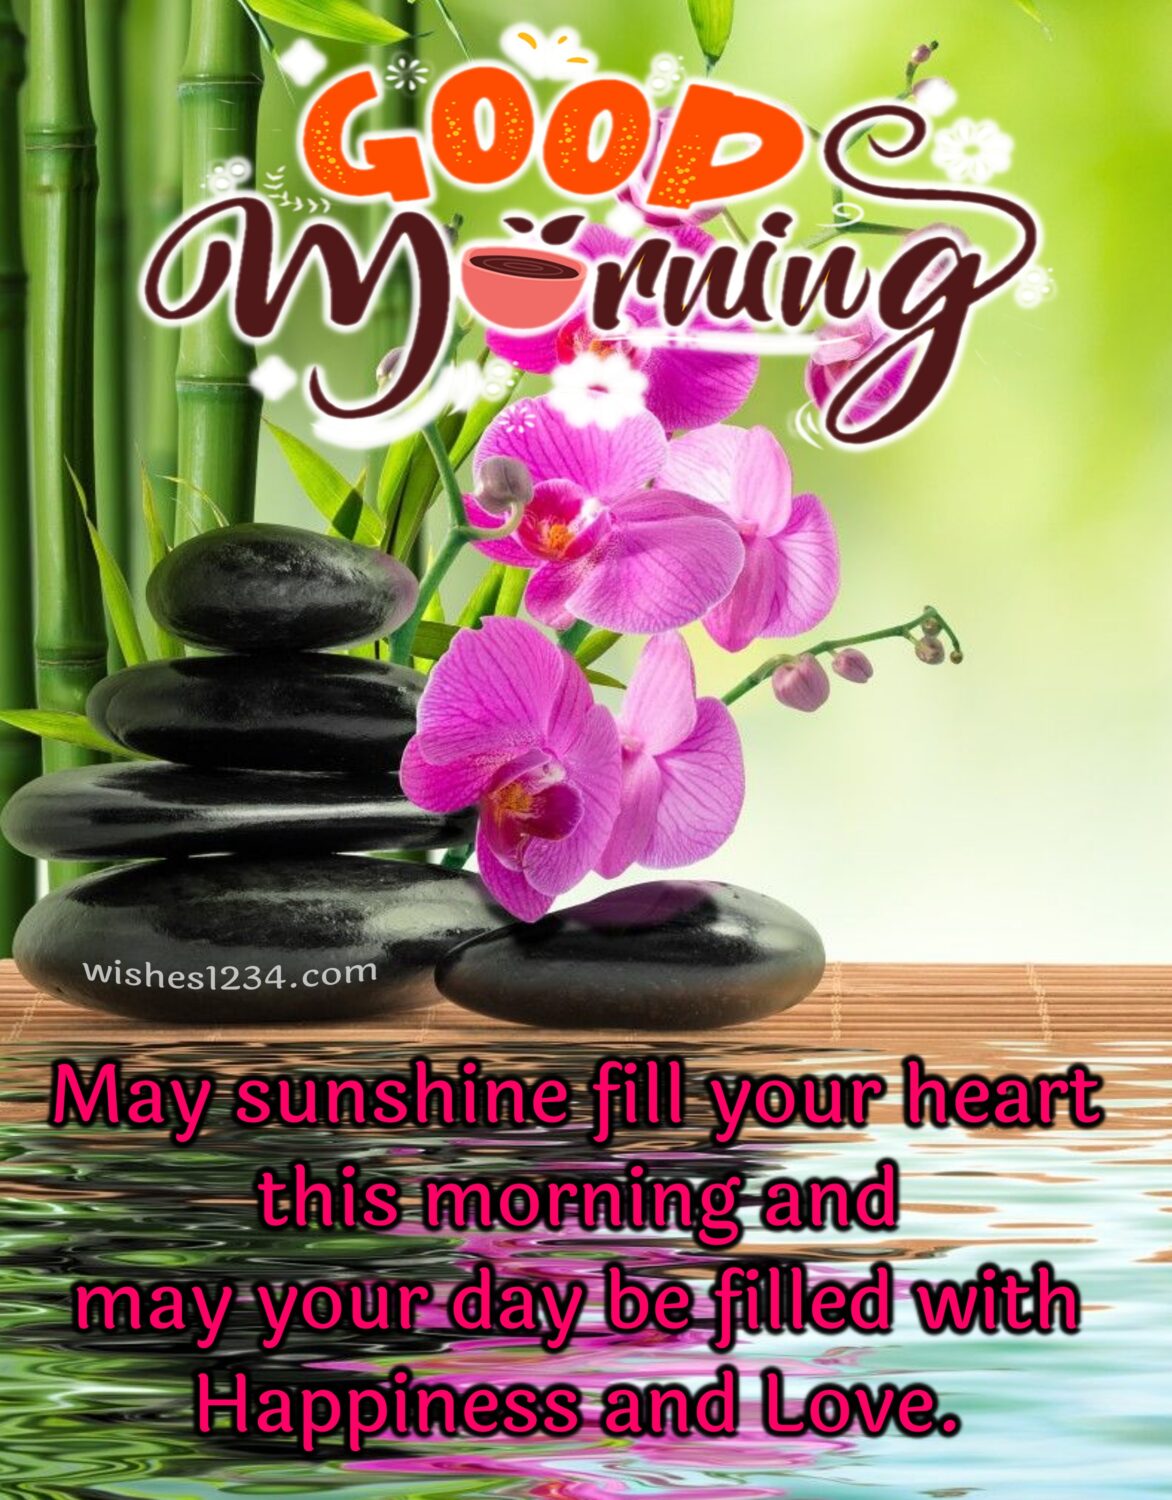 Good morning blessings with orchid background, Quotes about Monday.